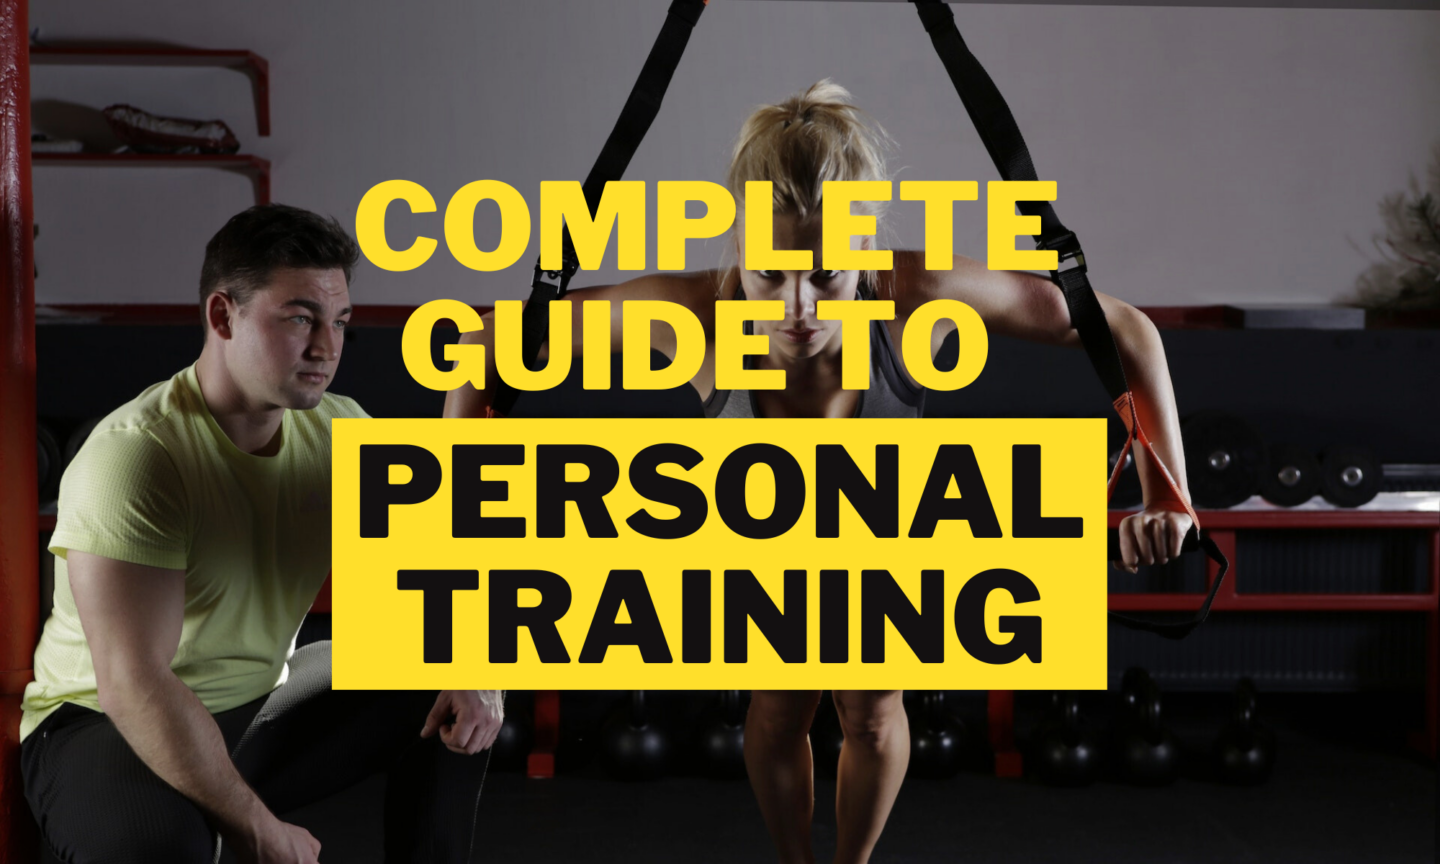 The Complete Guide To Personal Training